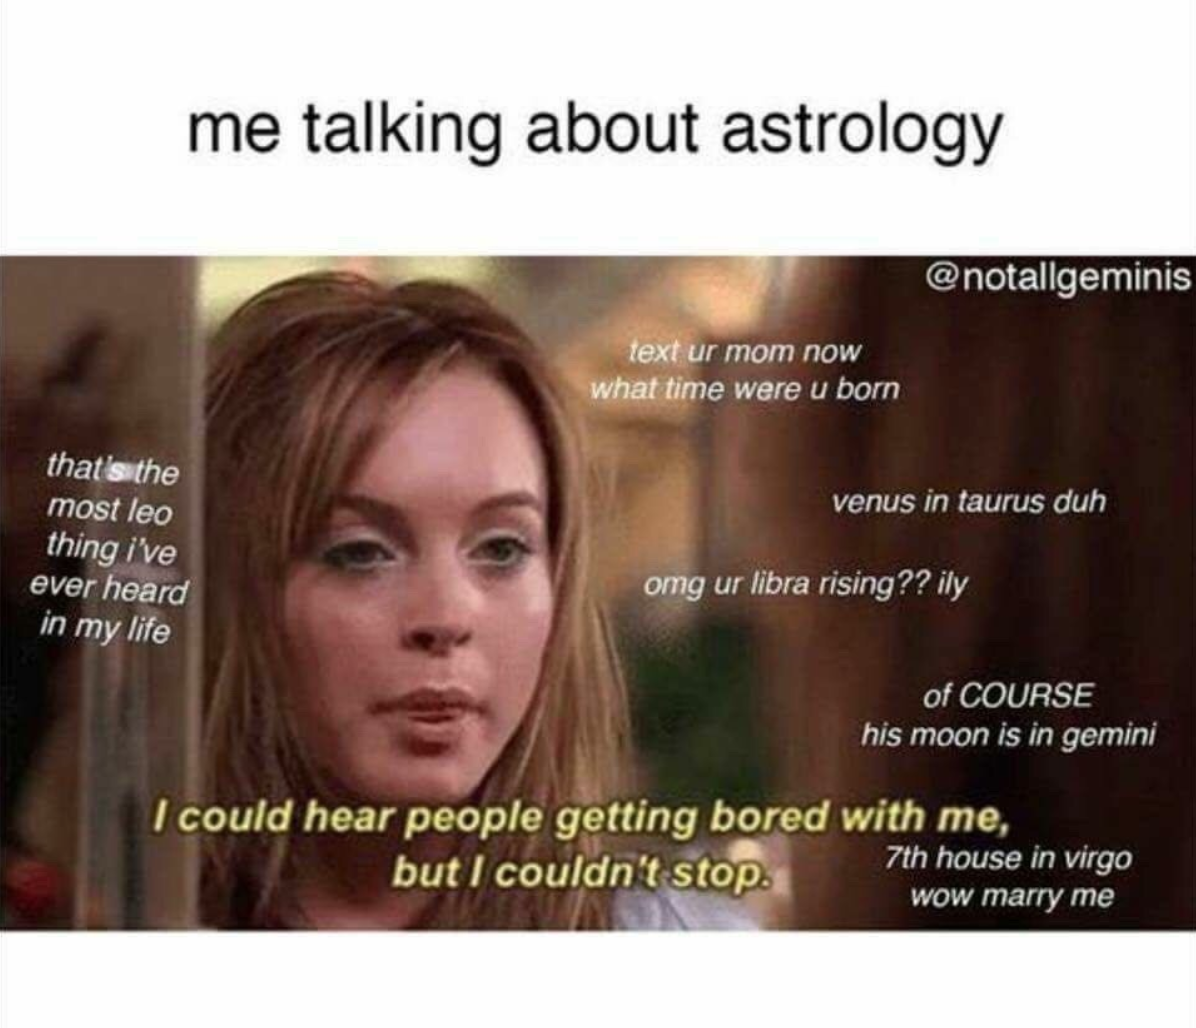 27 Astrology Memes That'll Crack You Up Whether You're A Believer Or Not